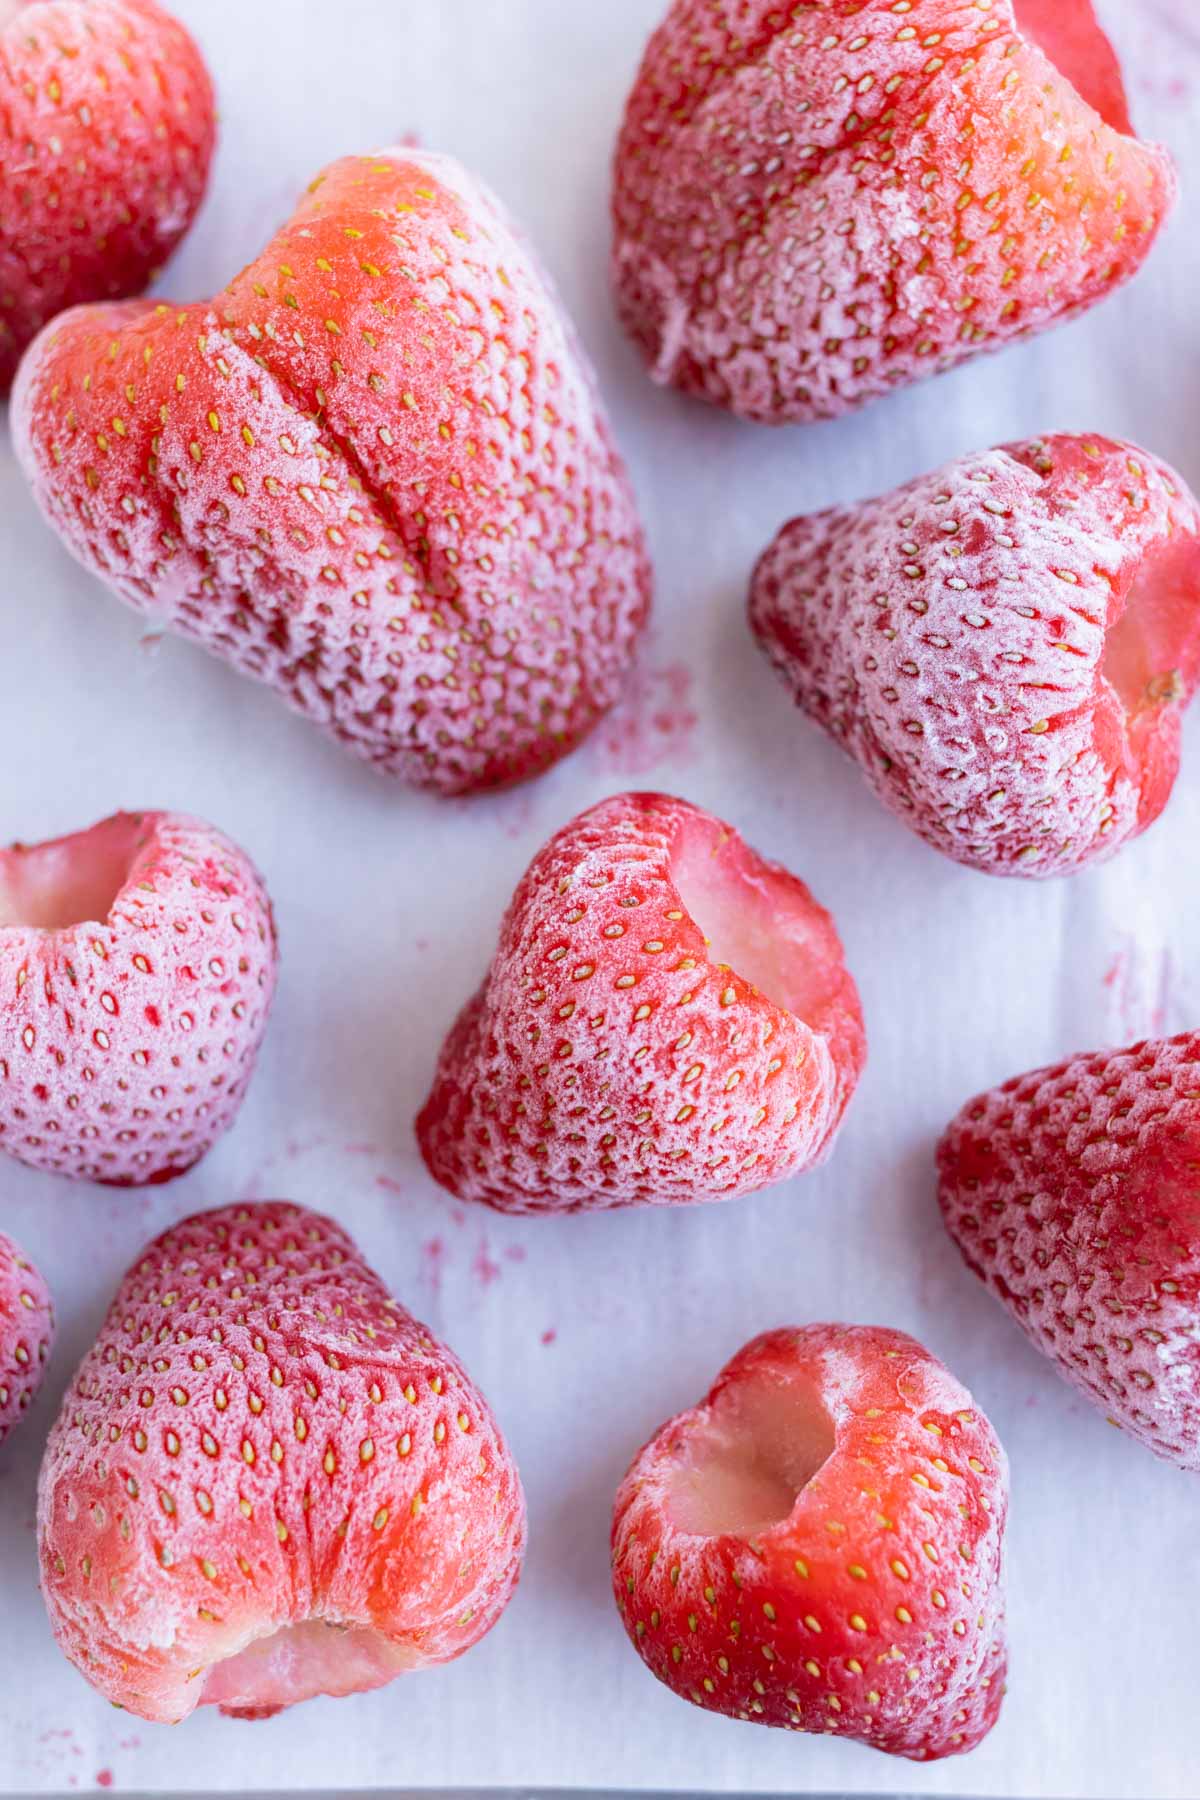 Frozen strawberries are shown on a baking sheet.